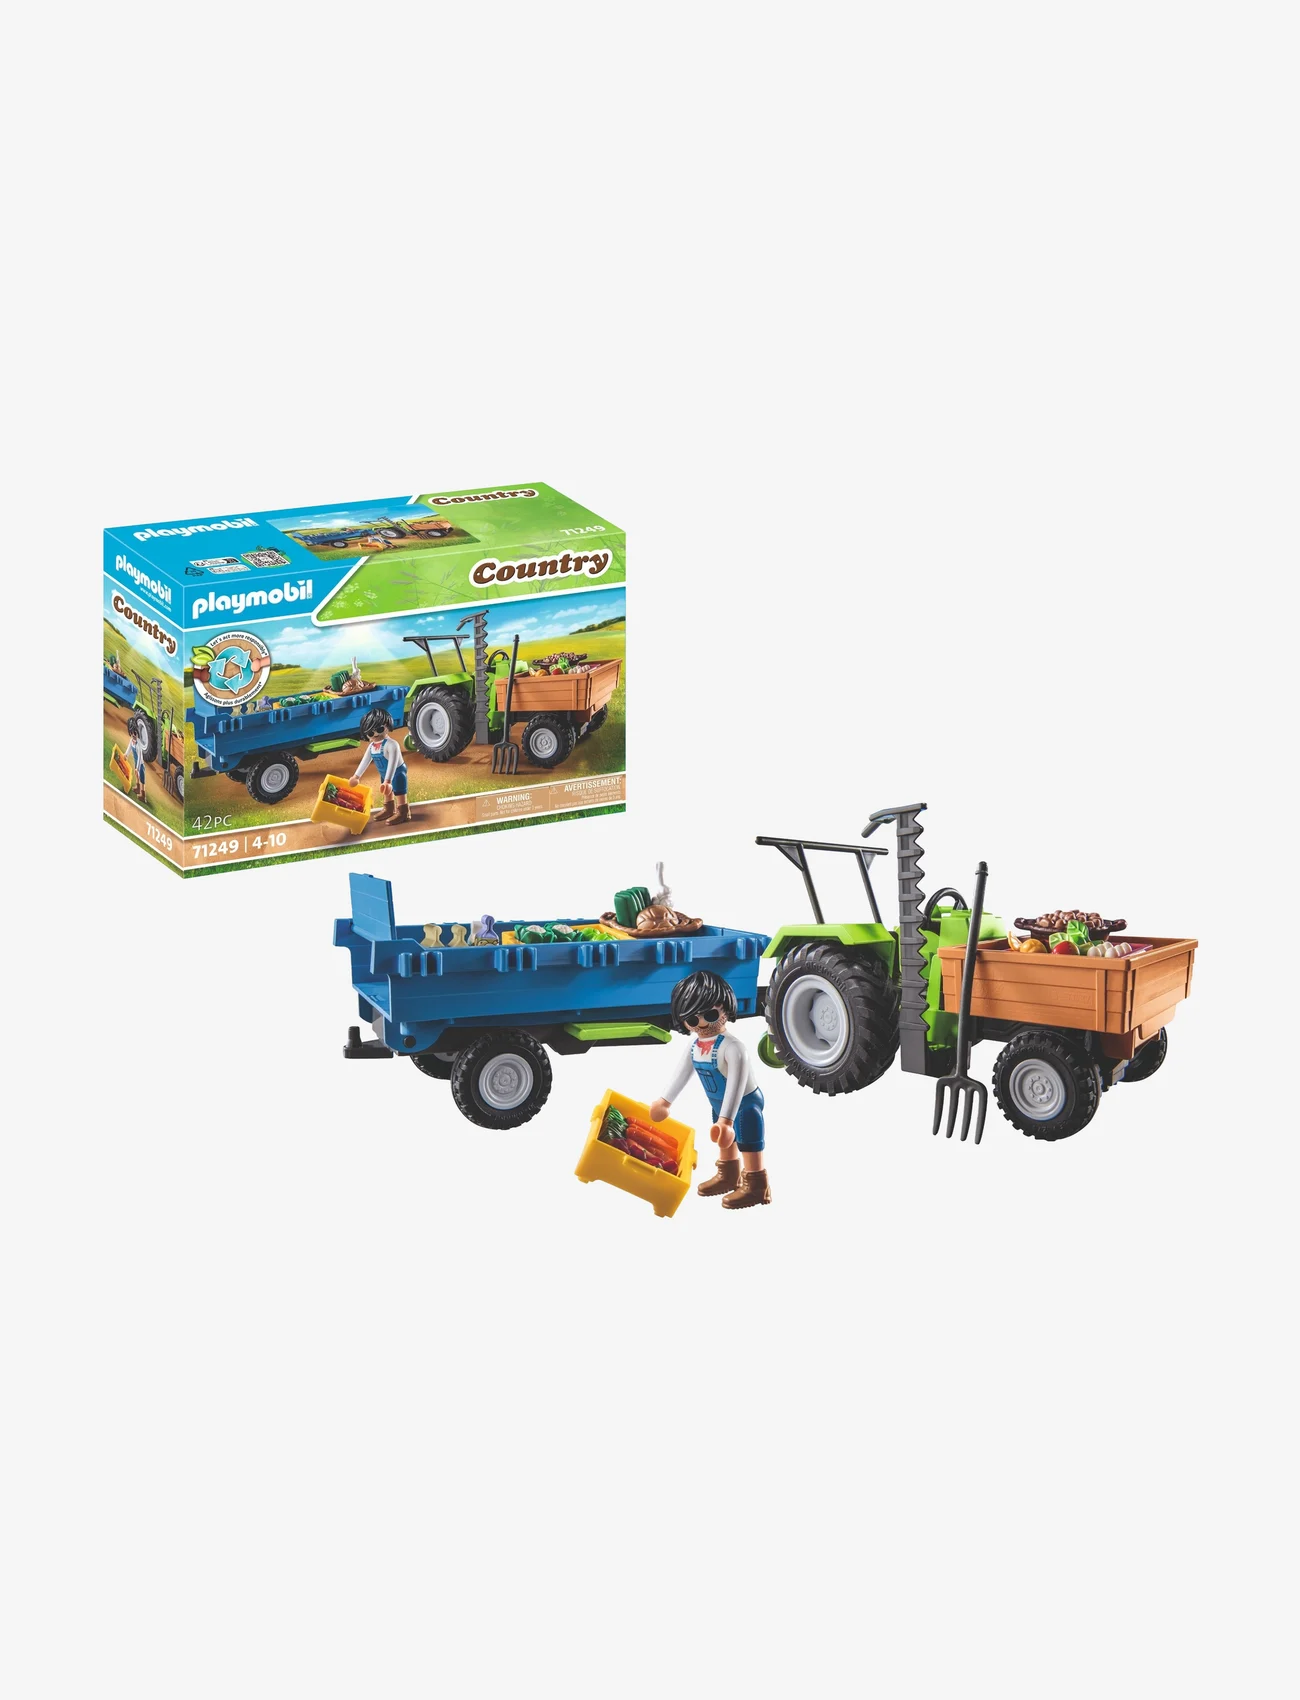 PLAYMOBIL - PLAYMOBIL Country Harvester Tractor with Trailer - 71249 - playmobil country - multicolored - 0